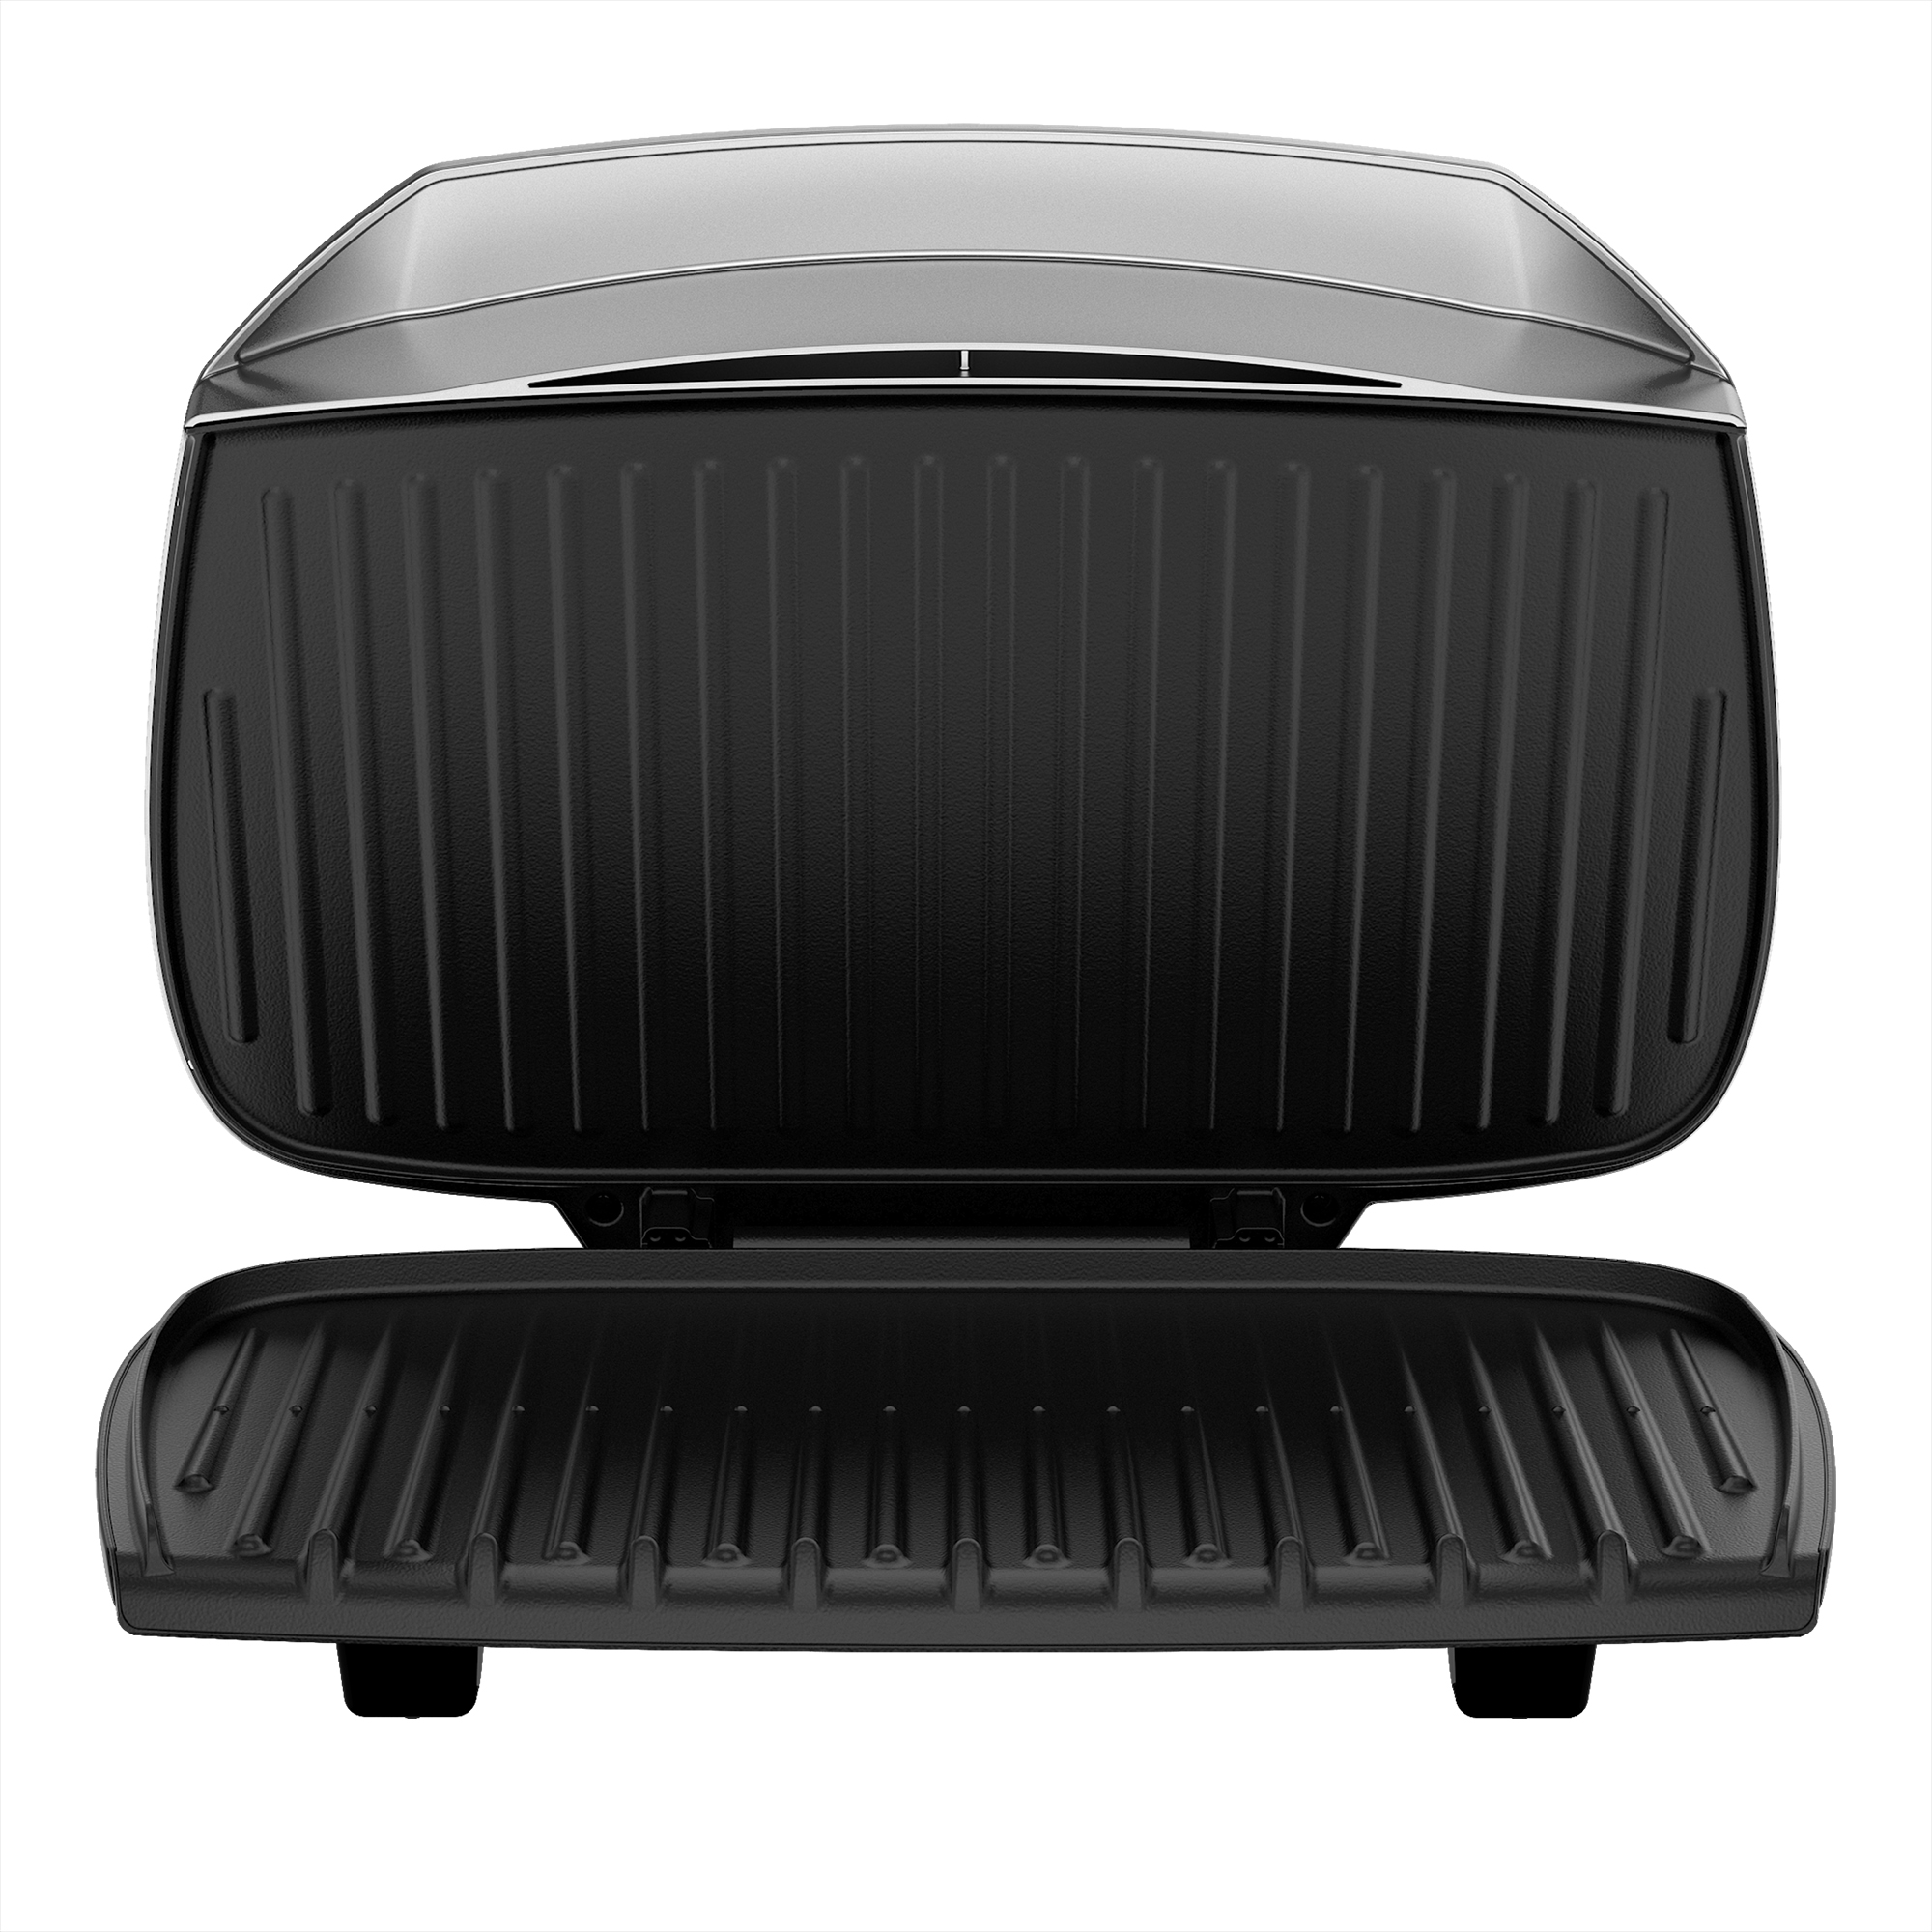 George Foreman 9-Serving Classic Plate Electric Indoor Grill and Panini Press, Platinum, GR2144P - image 5 of 11